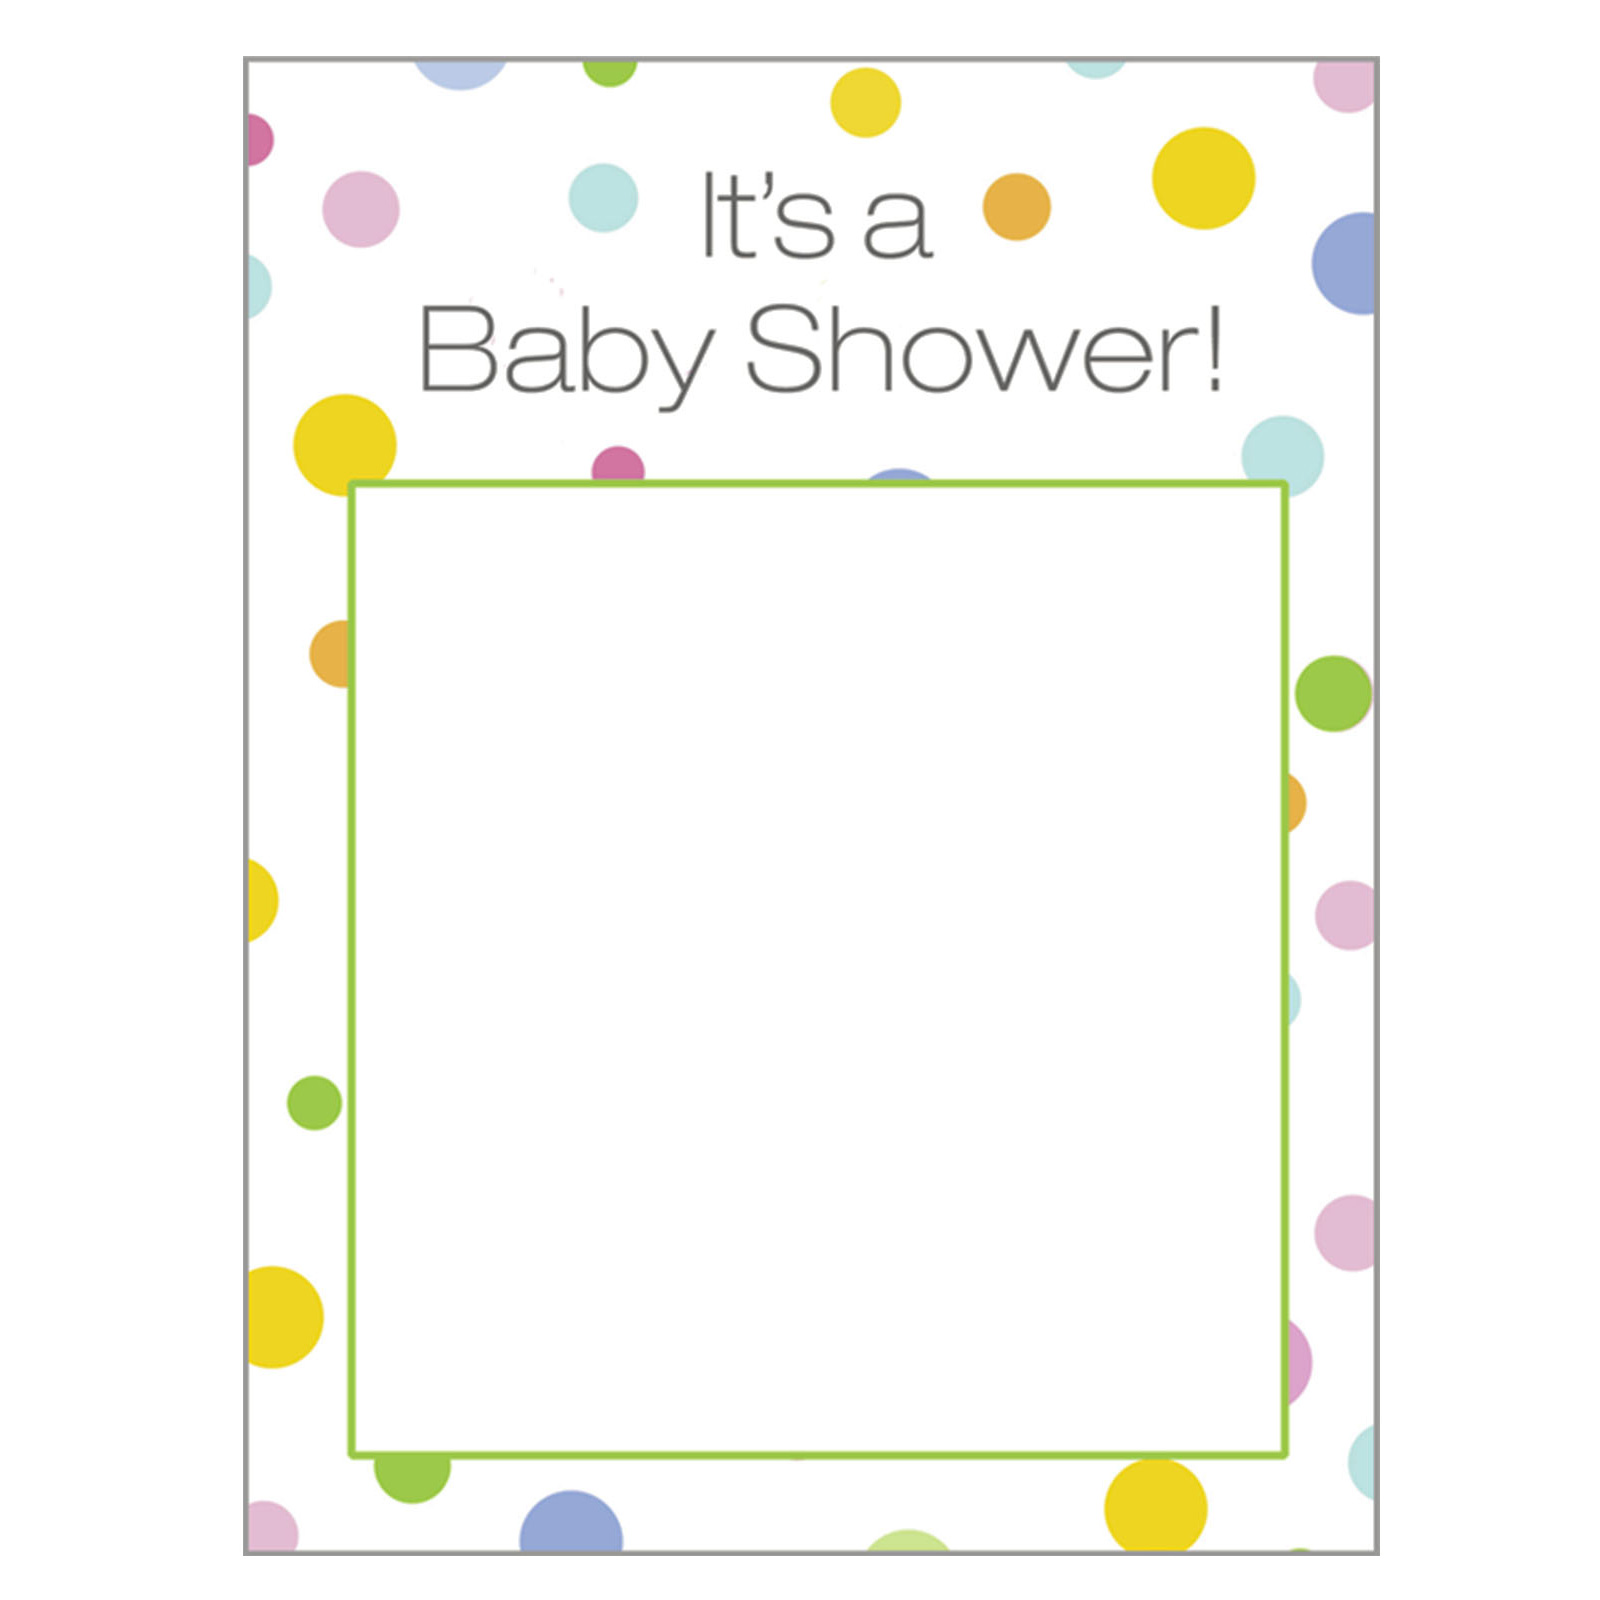 free clipart images for baby shower - photo #49